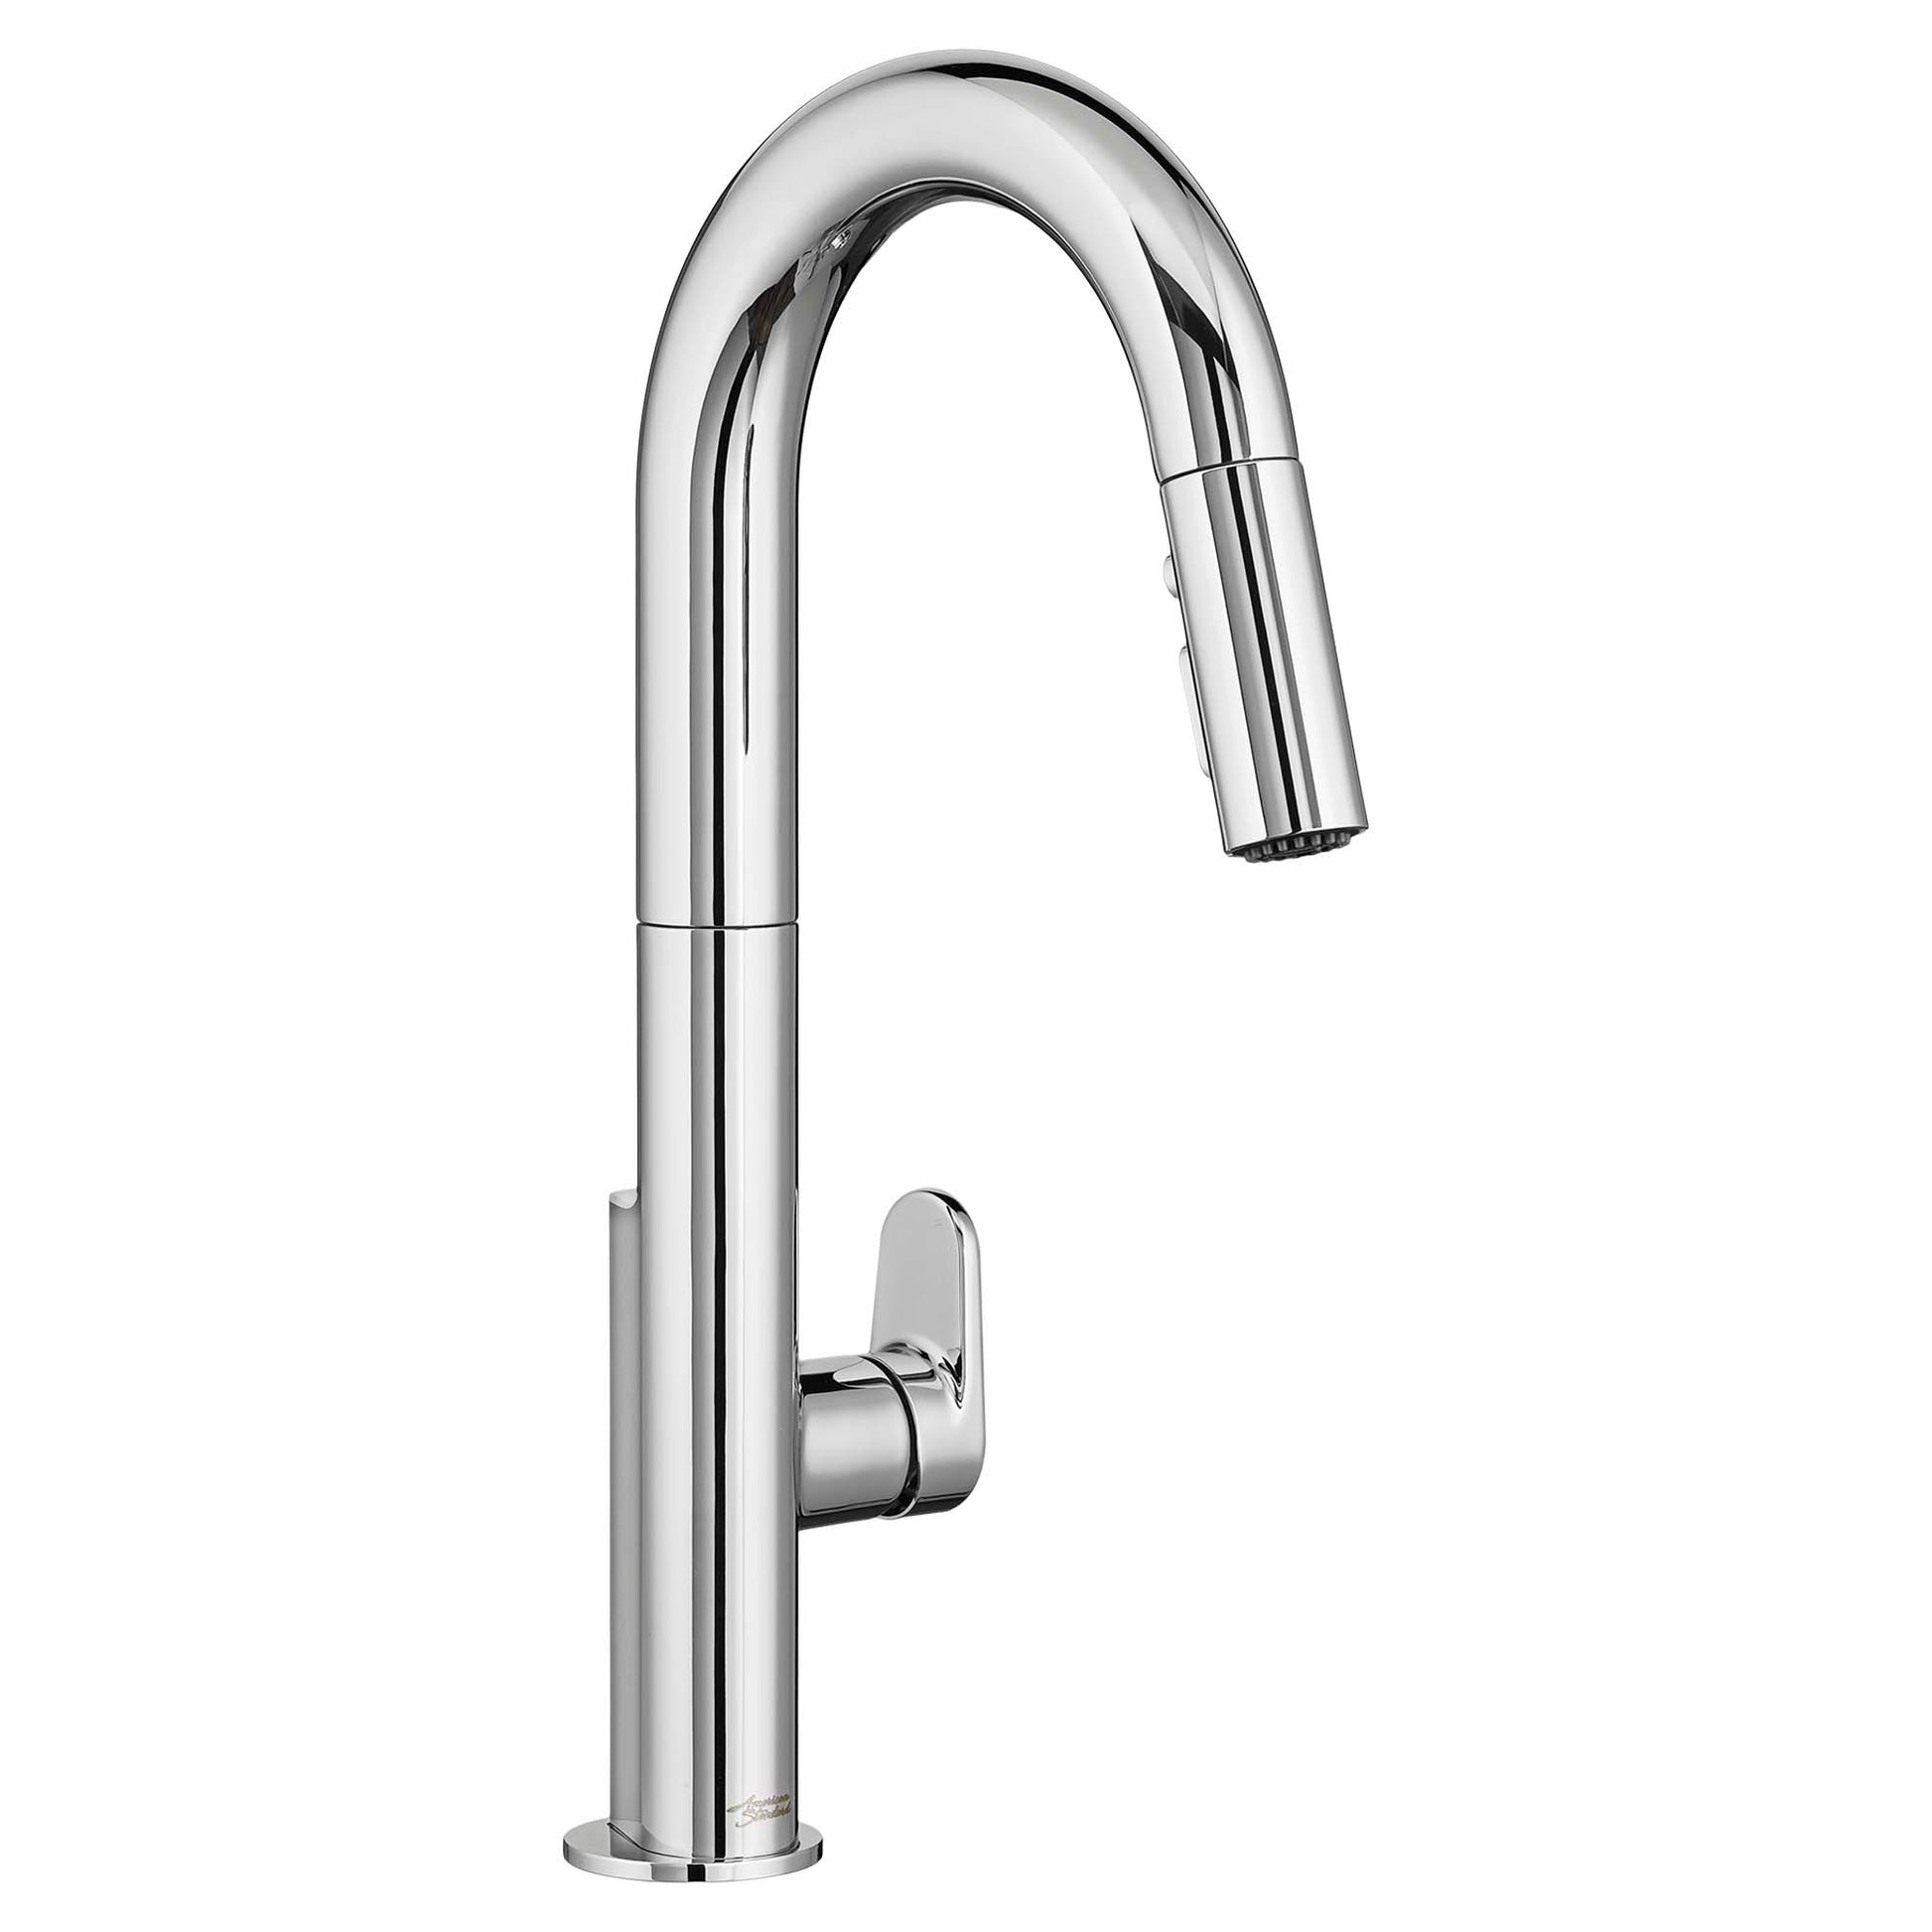 AMERICAN-STANDARD 4931300.002, Beale Single-Handle Pull-Down Dual Spray Kitchen Faucet 1.5 gpm/5.7 L/min in Chrome